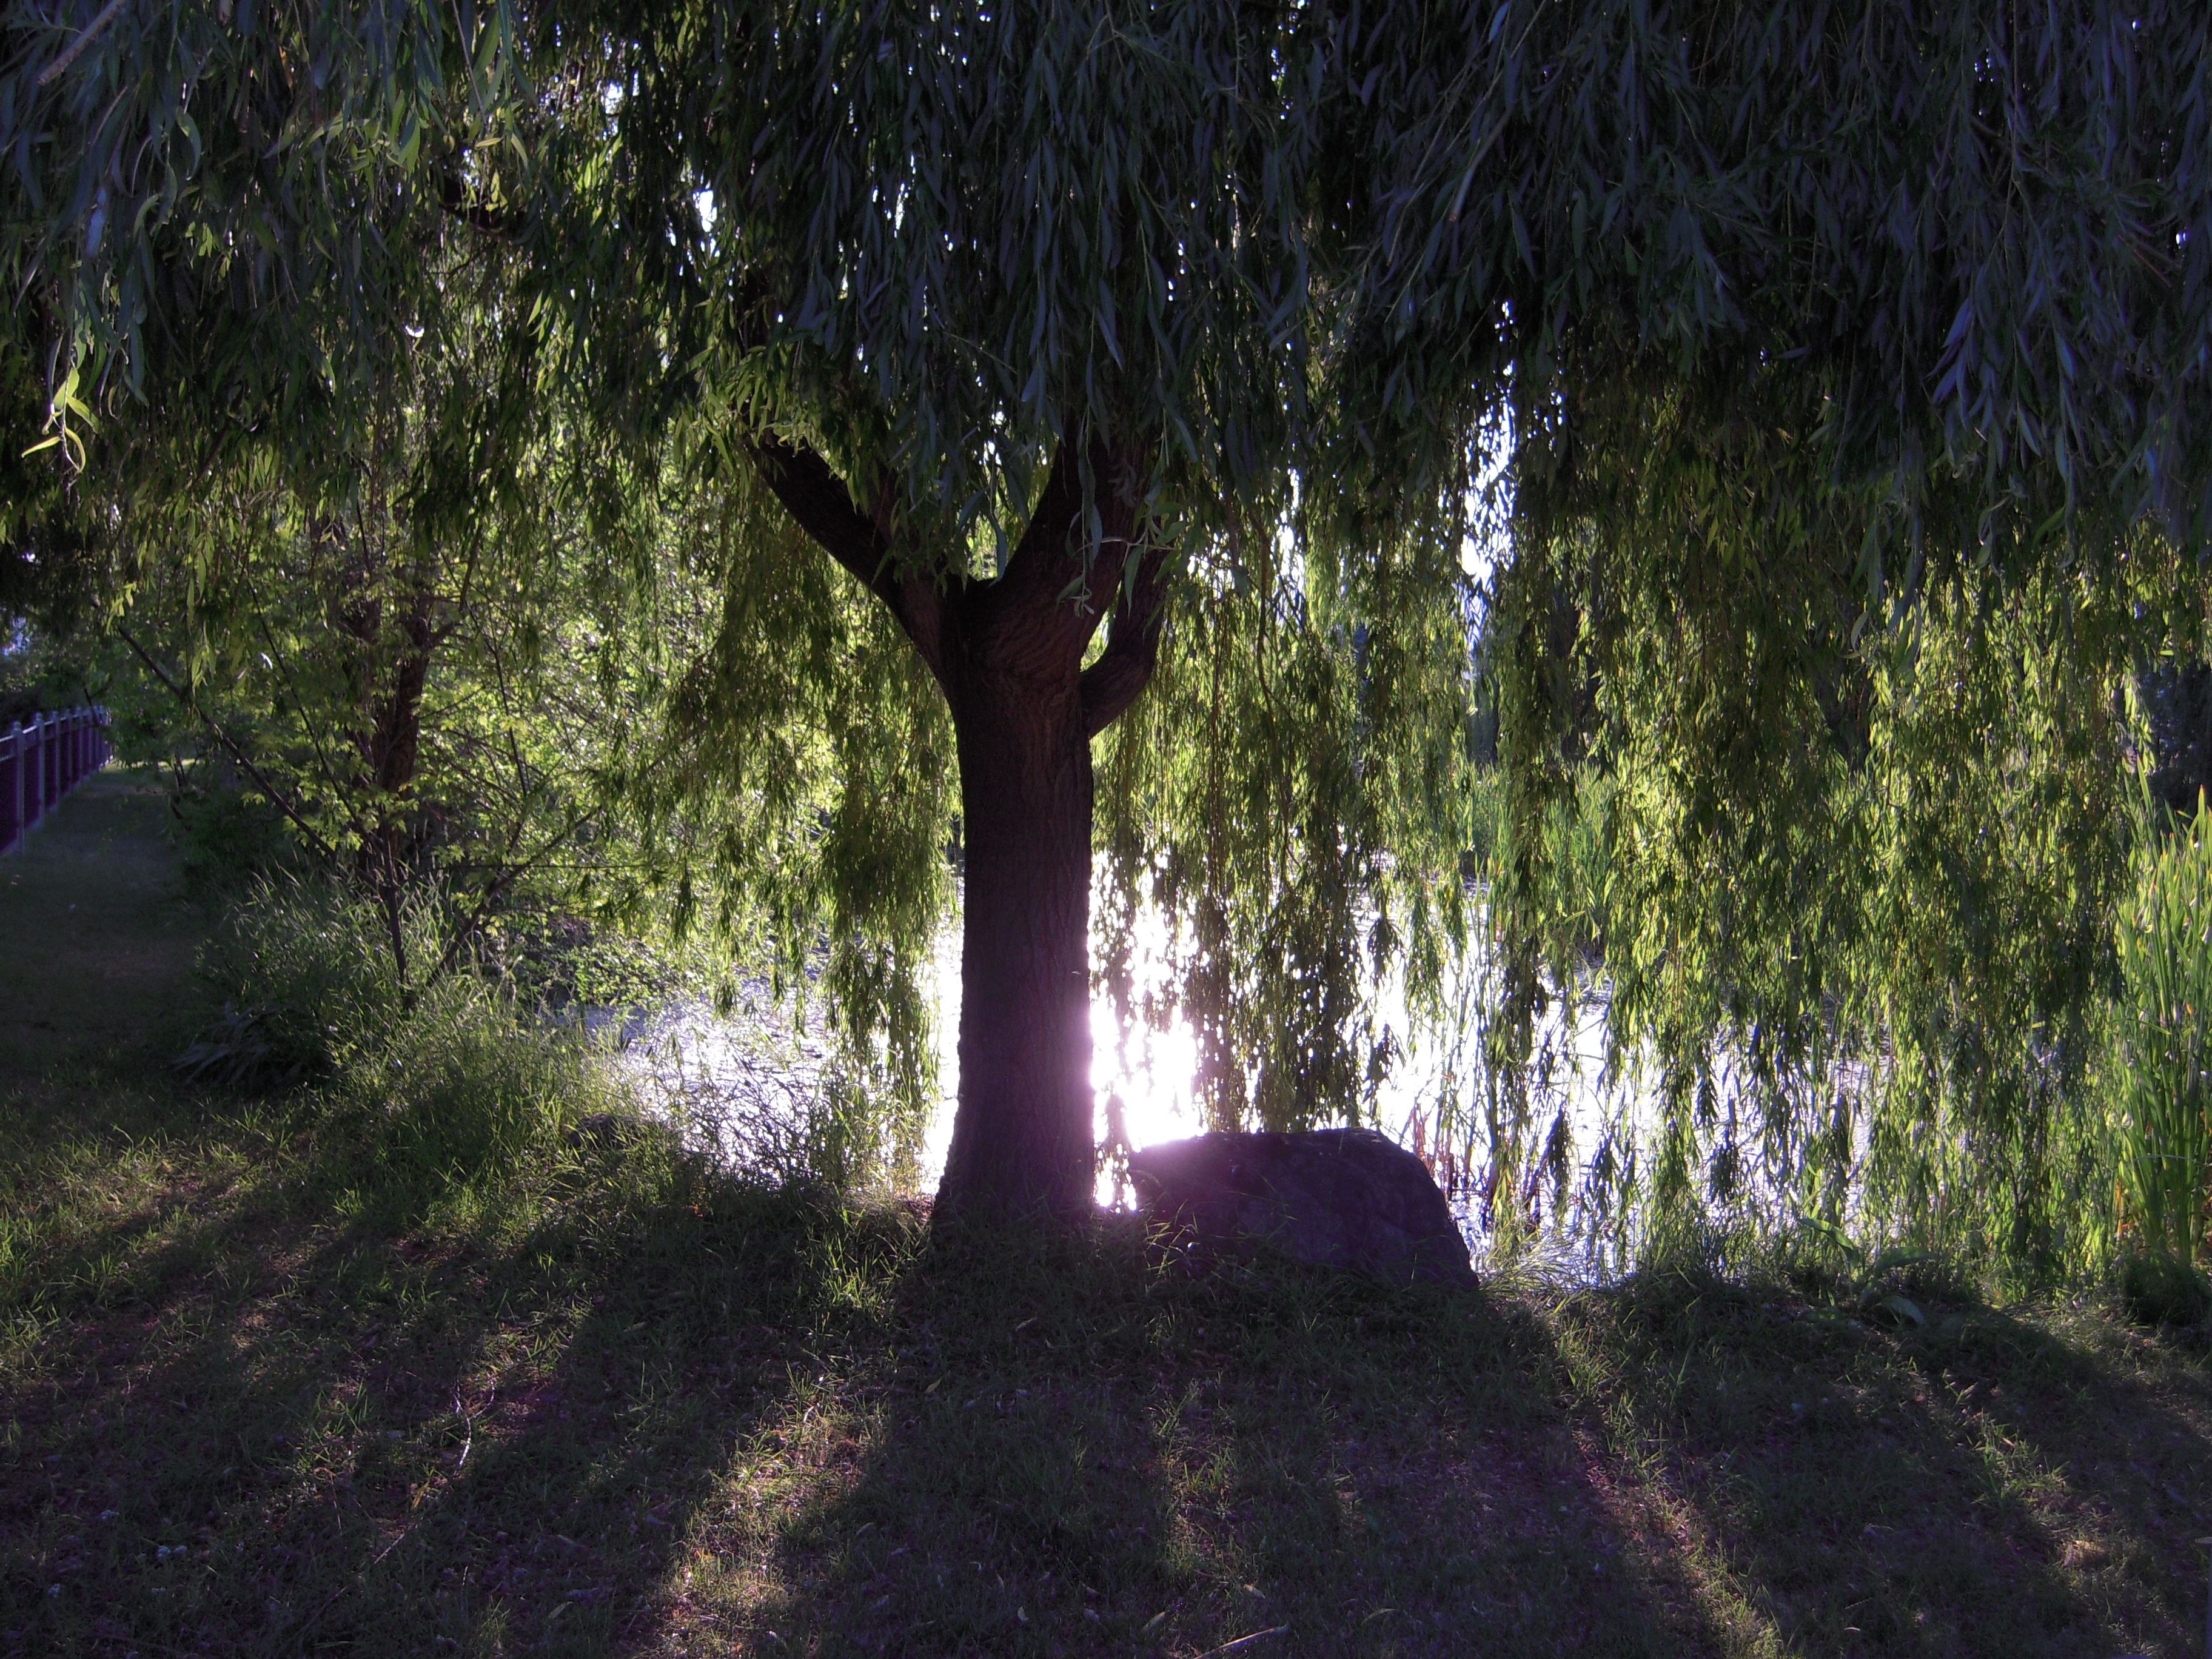 Willow Tree Wallpapers - Wallpaper Cave